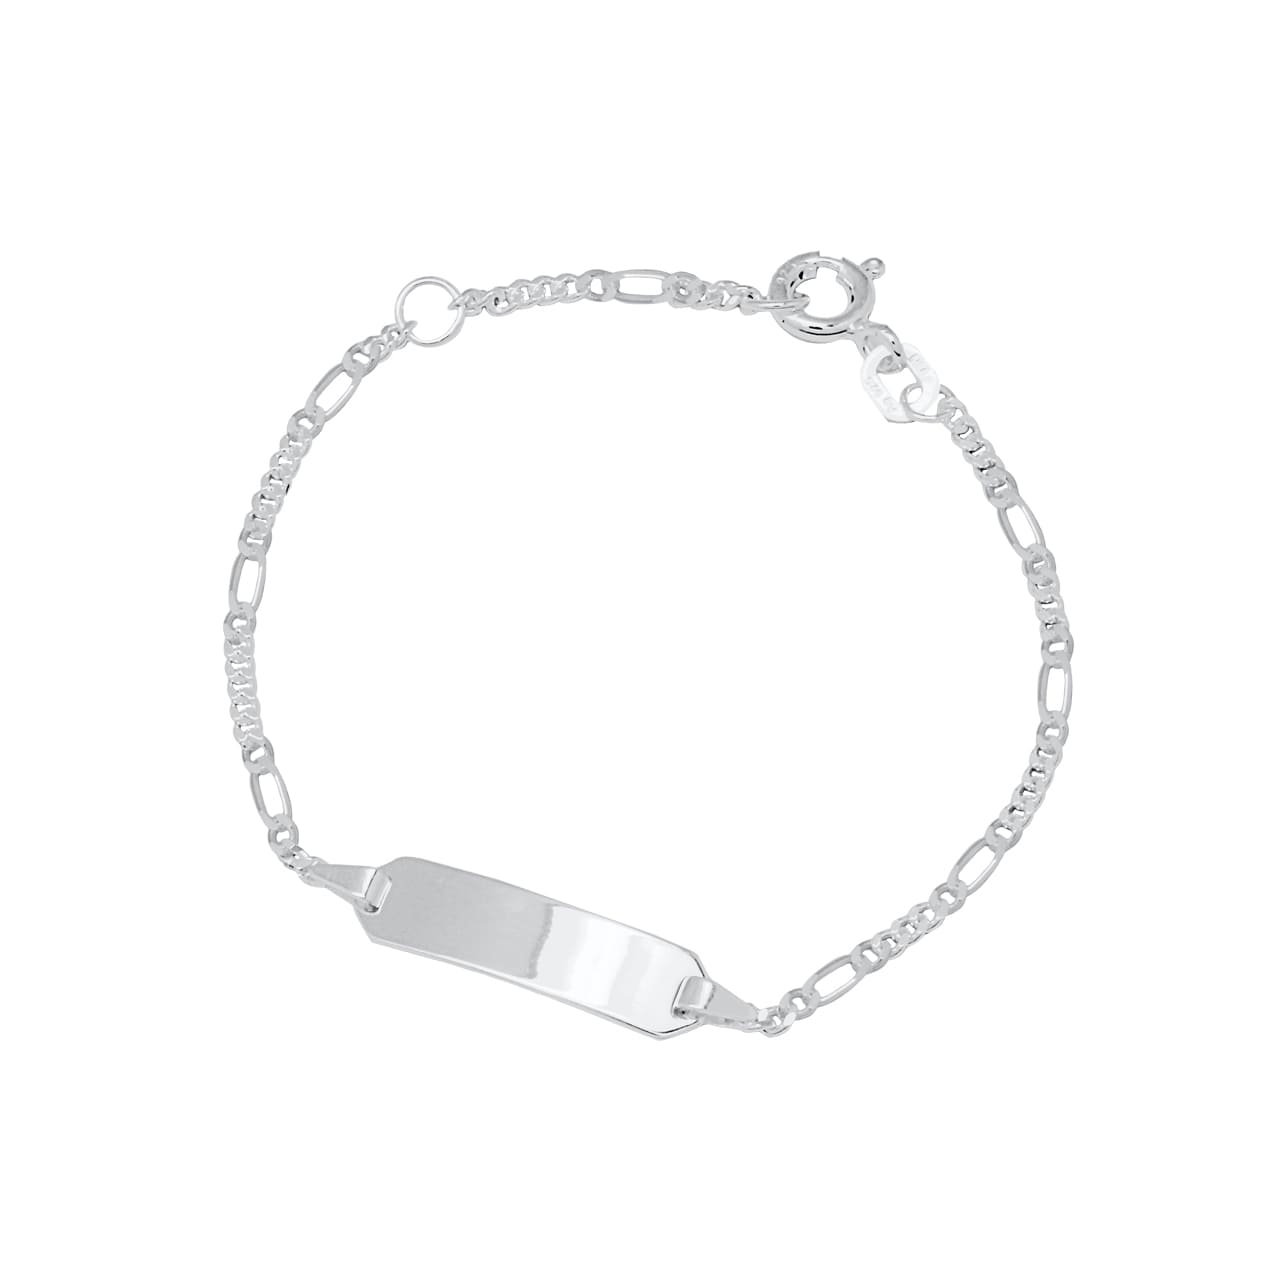 Kinder_id_Armband_lily_925_Sterling_Silber__12790